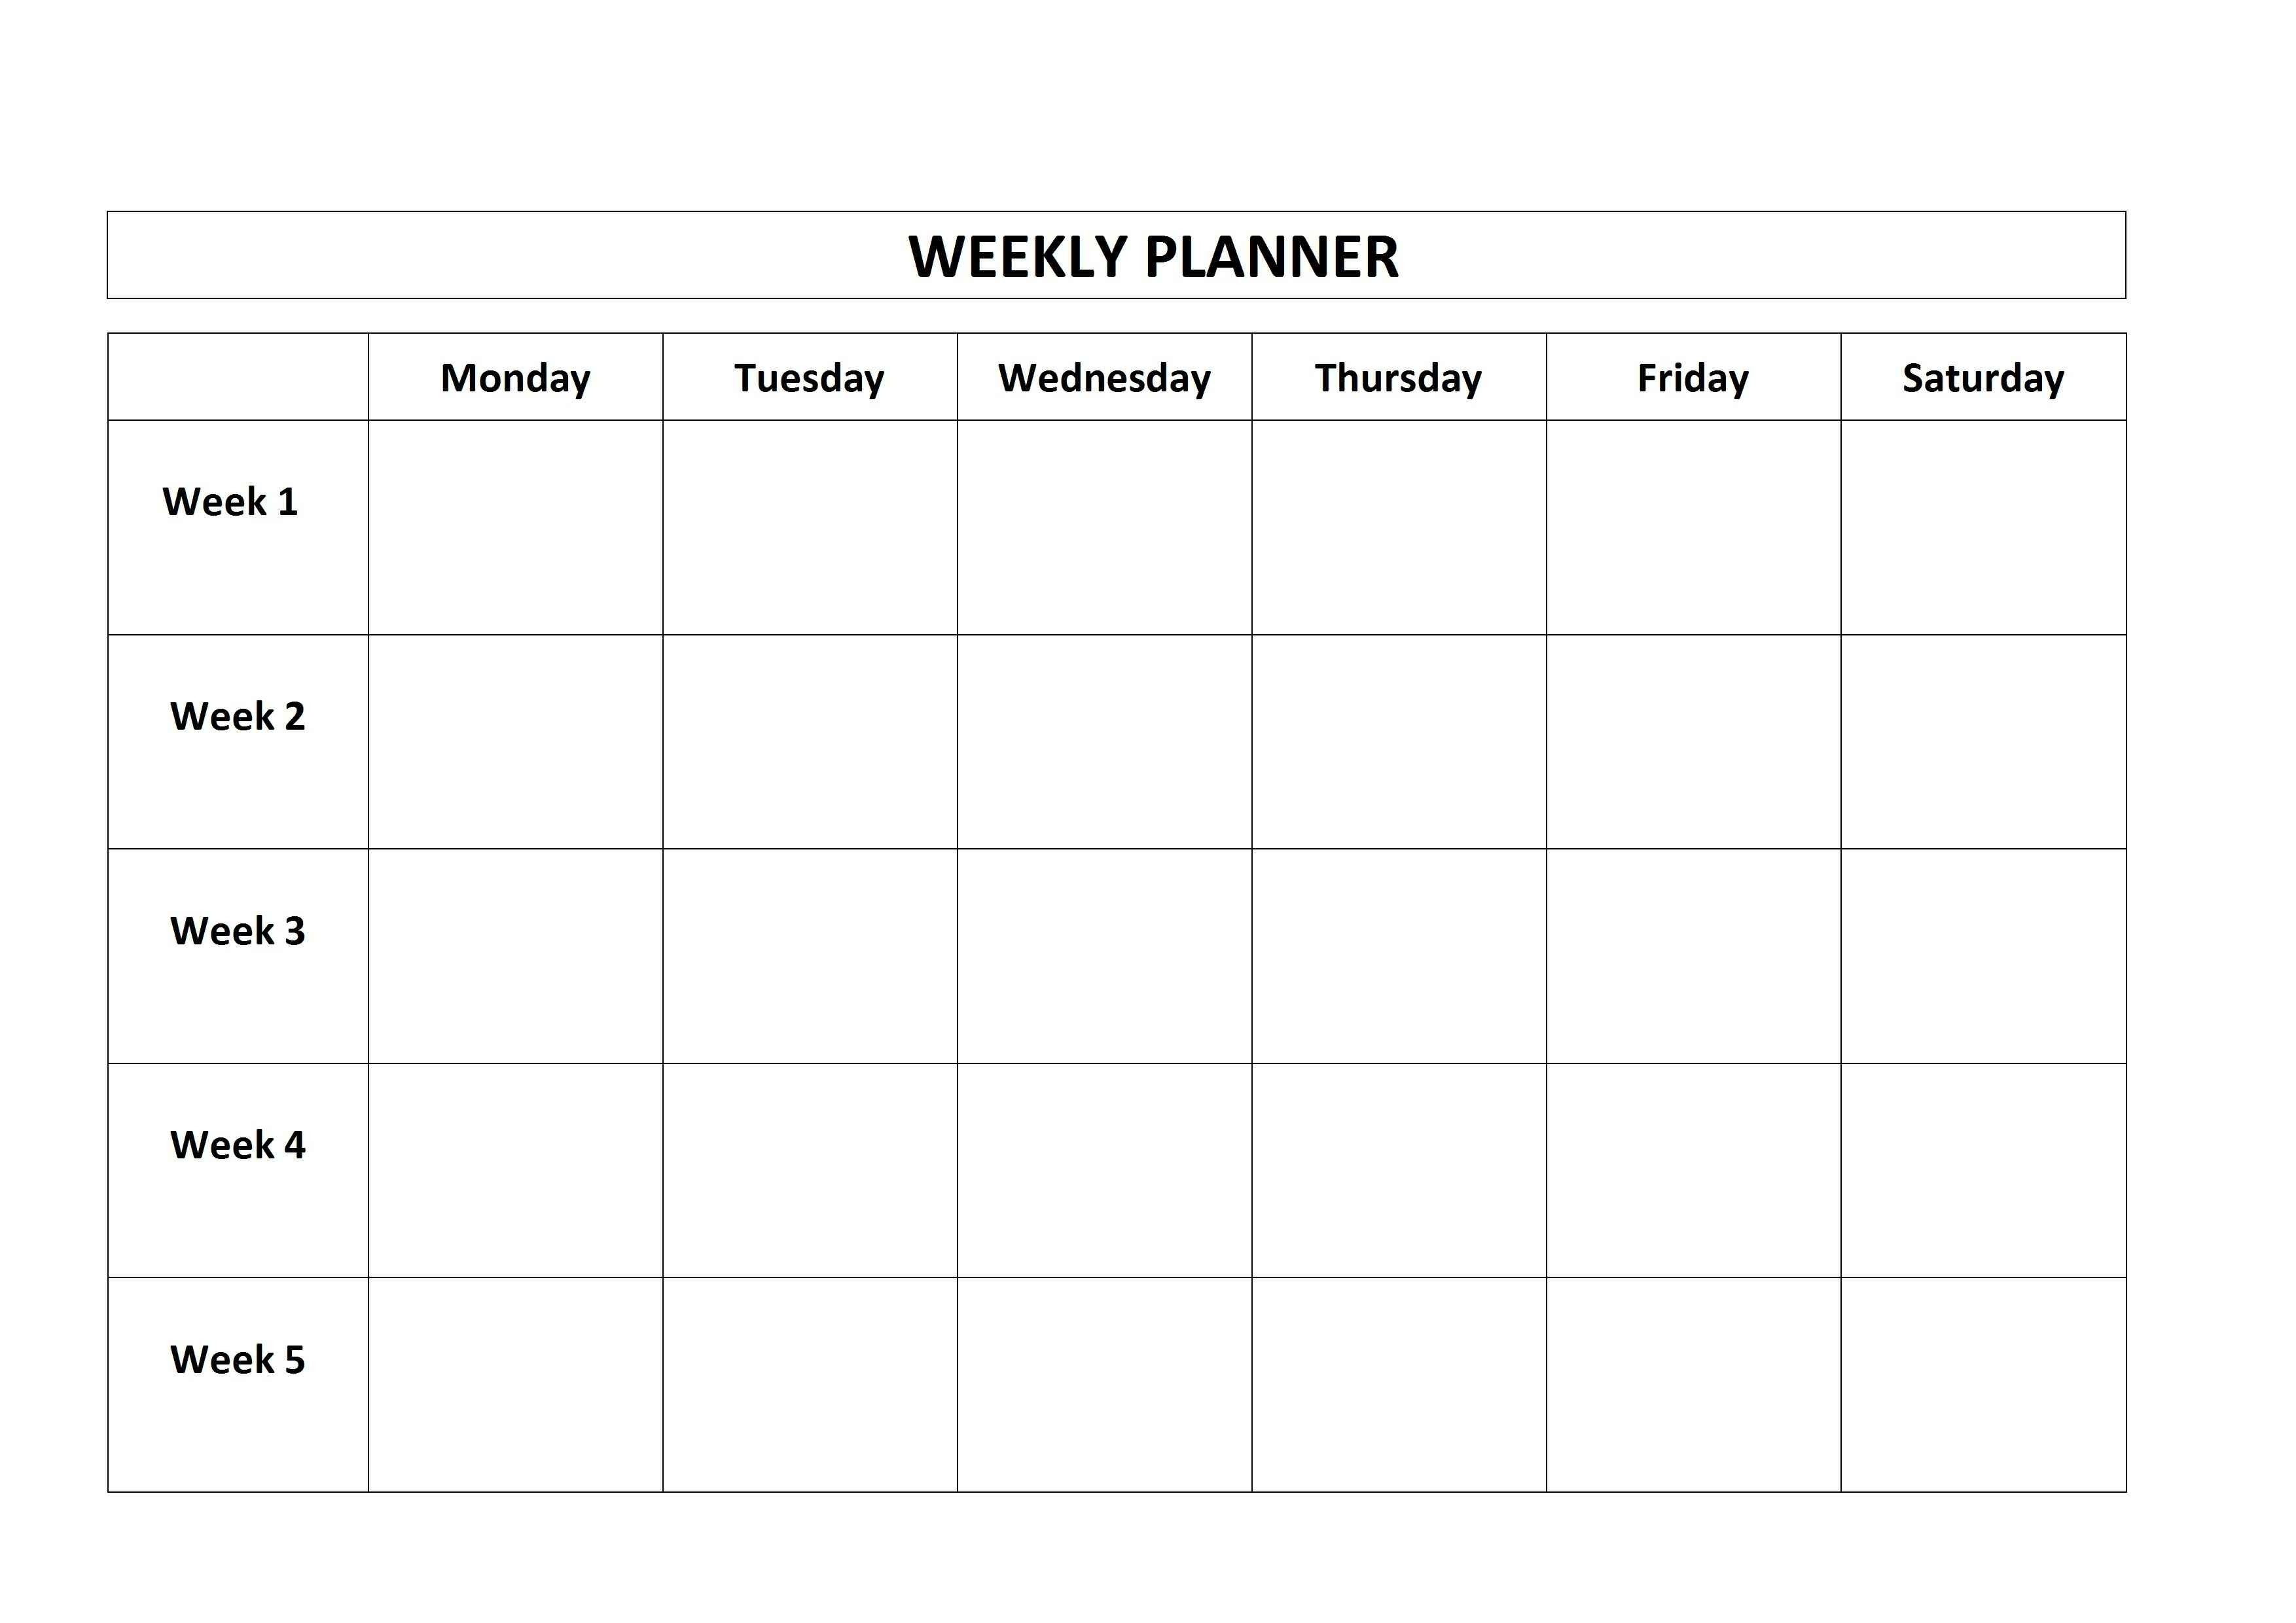 Monday Through Friday Class Schedule Template Time Weekly